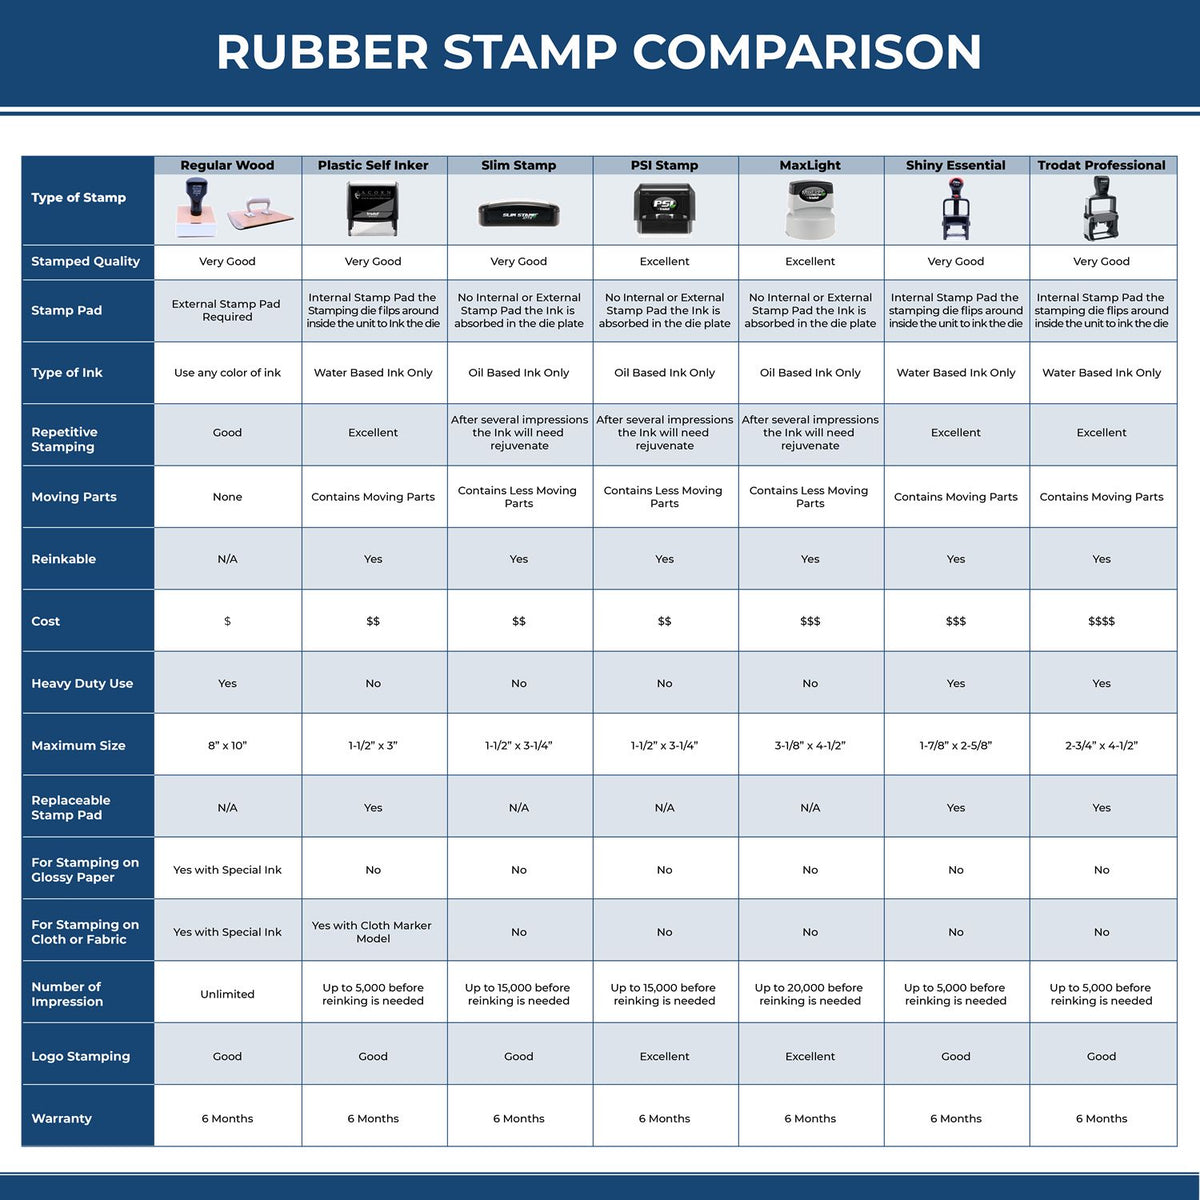 Large Self-Inking Privileged Stamp 4908S Rubber Stamp Comparison